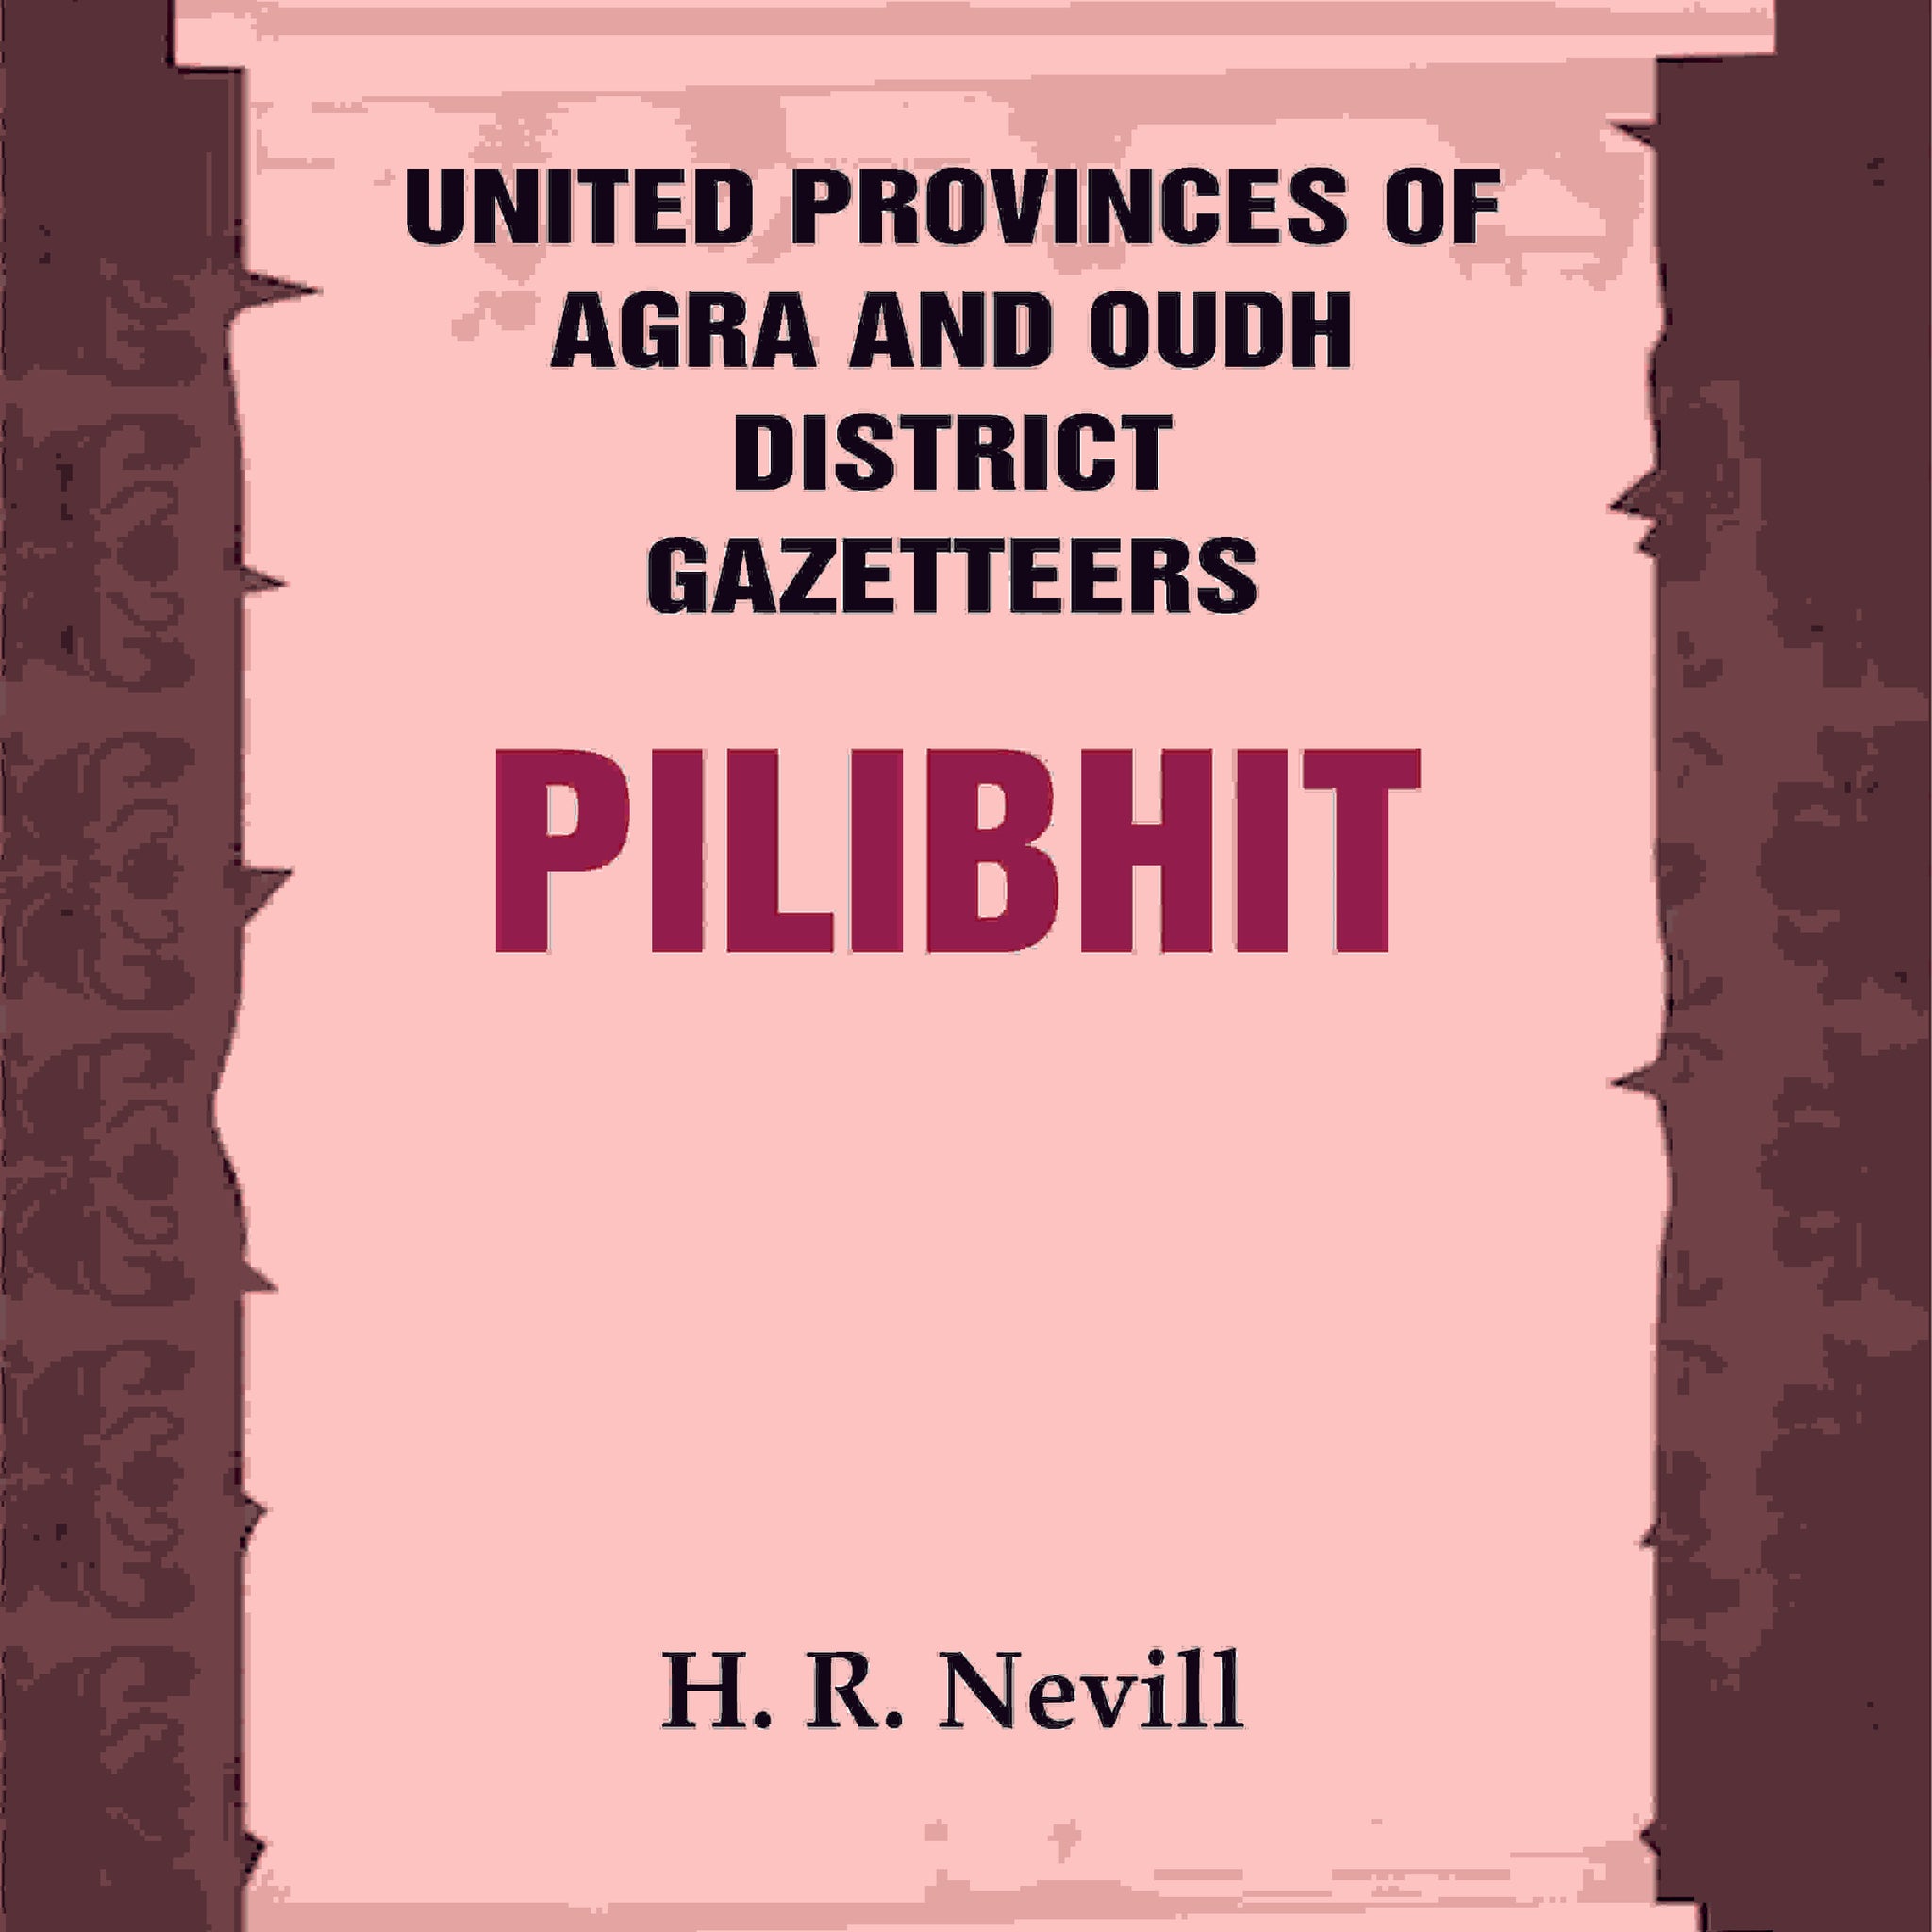 United Provinces of Agra and Oudh District Gazetteers: Pilibhit